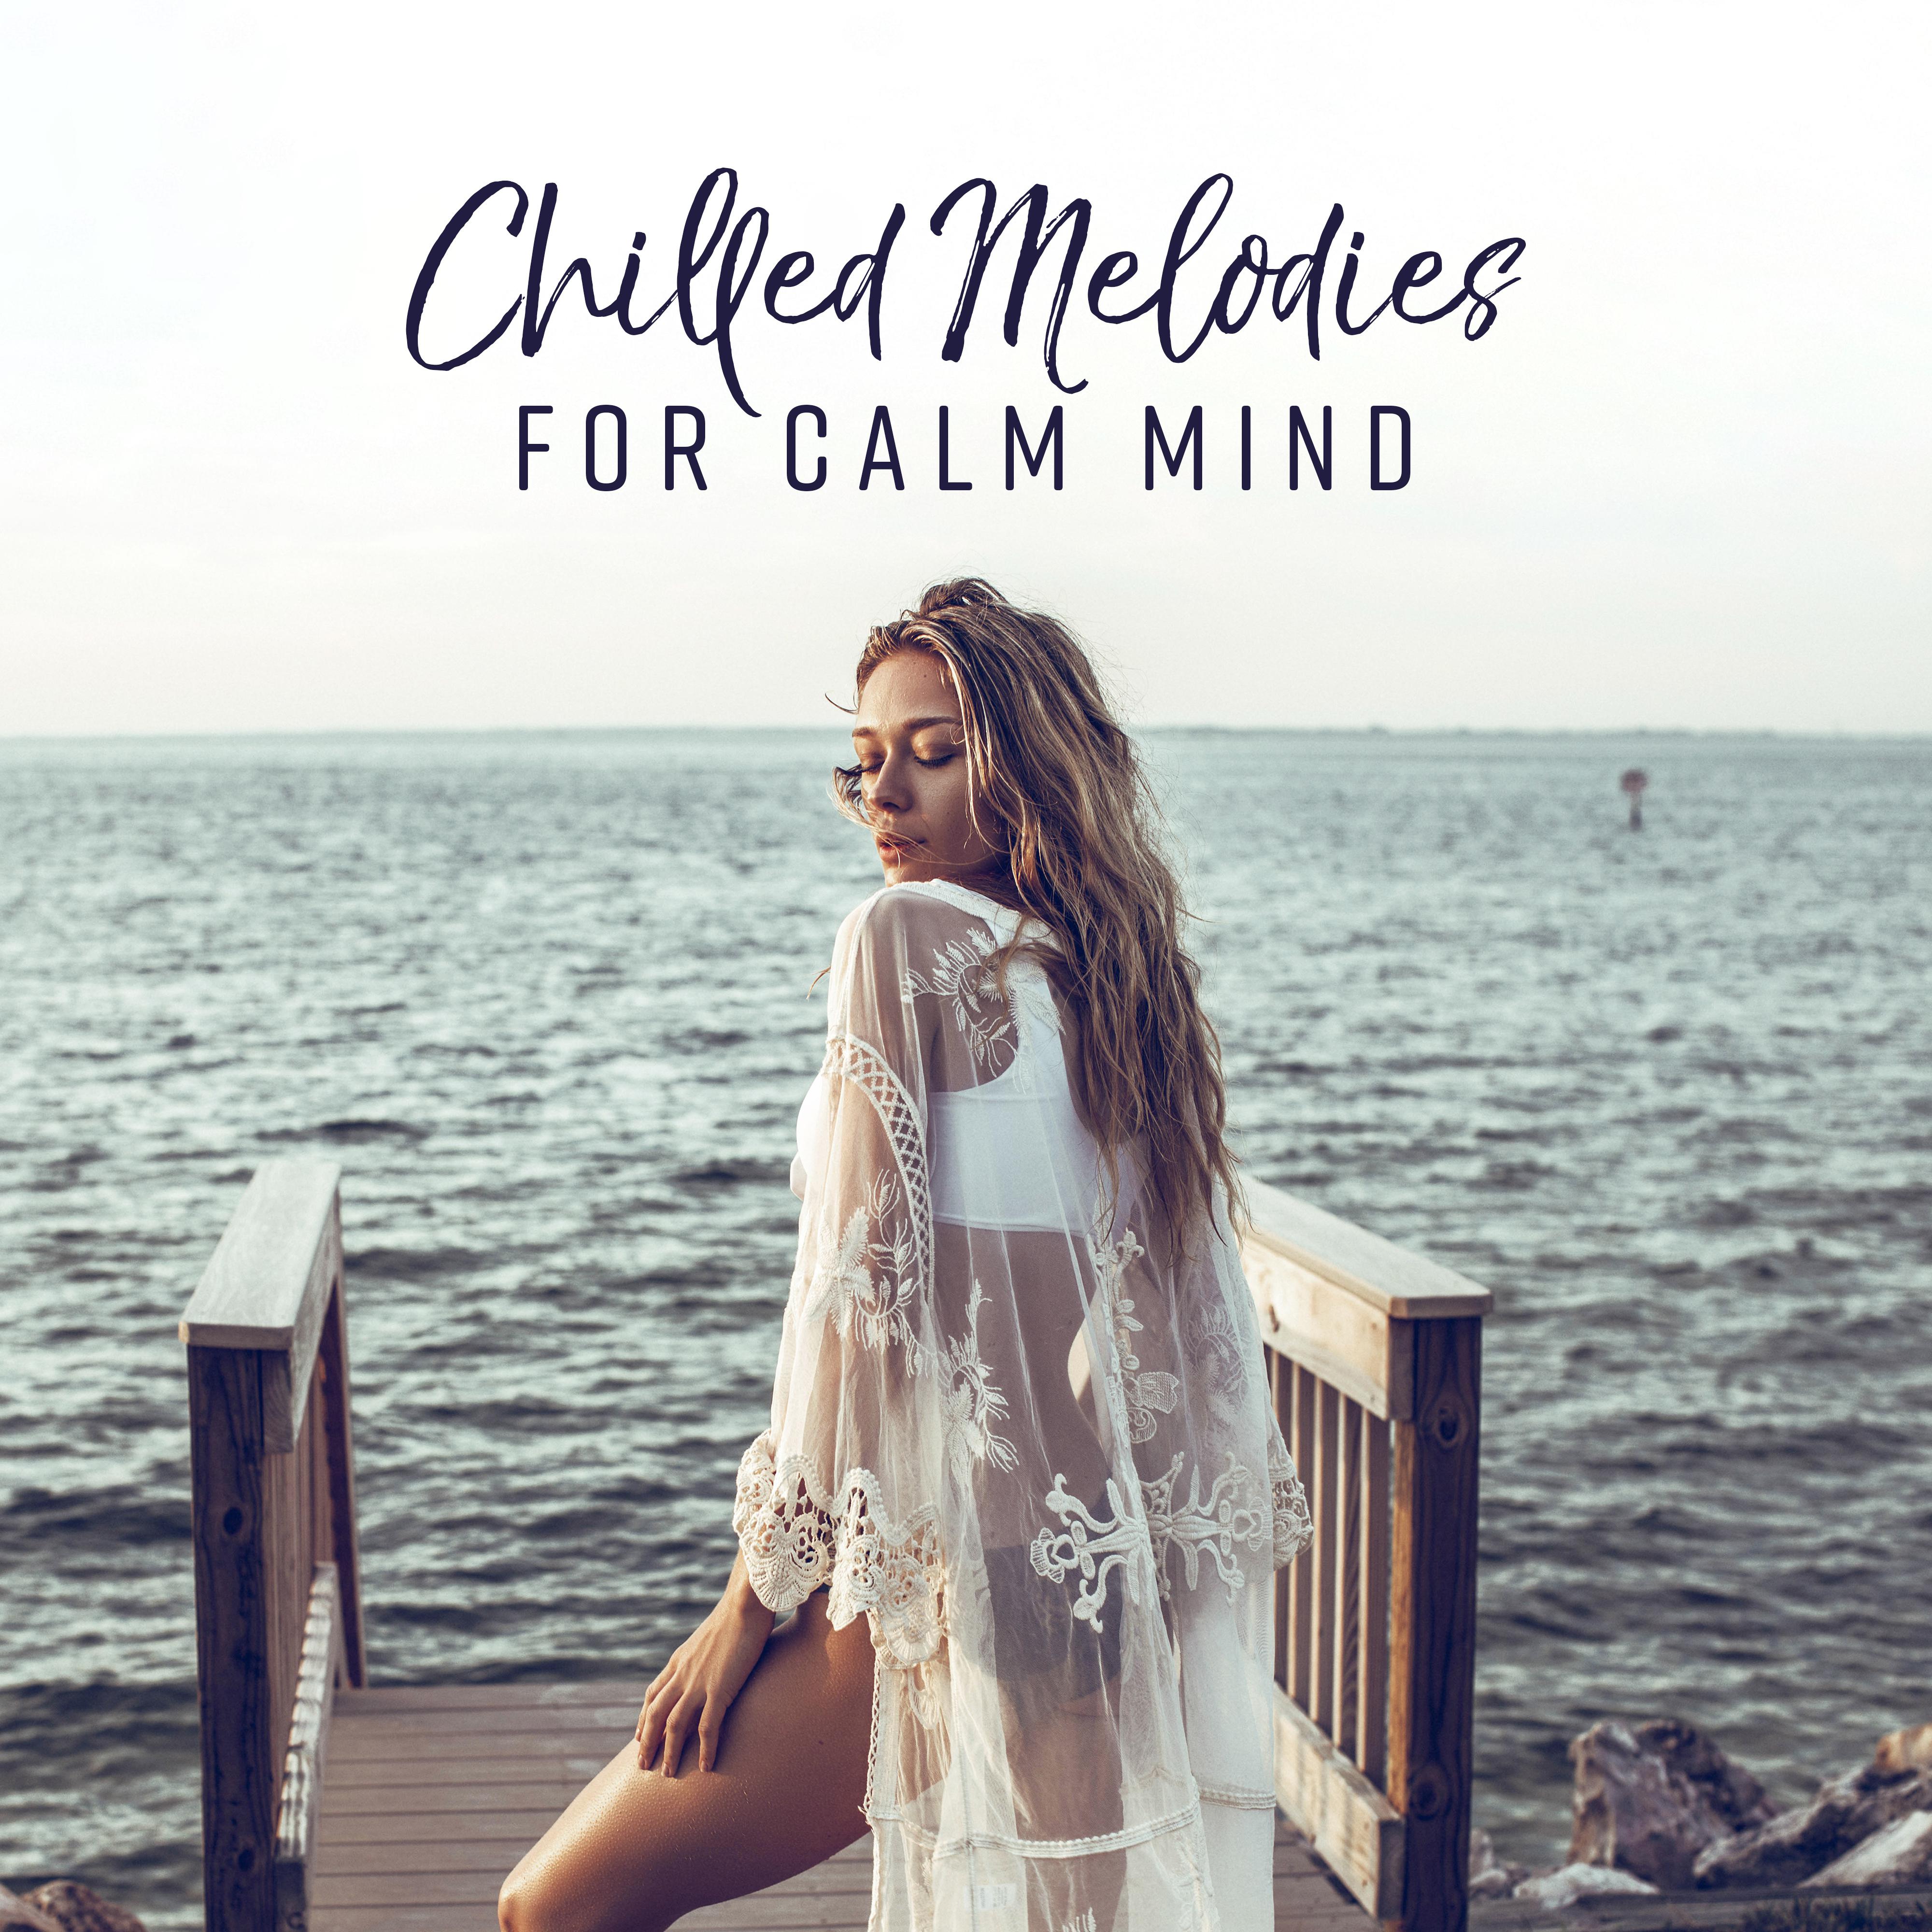 Chilled Melodies for Calm Mind